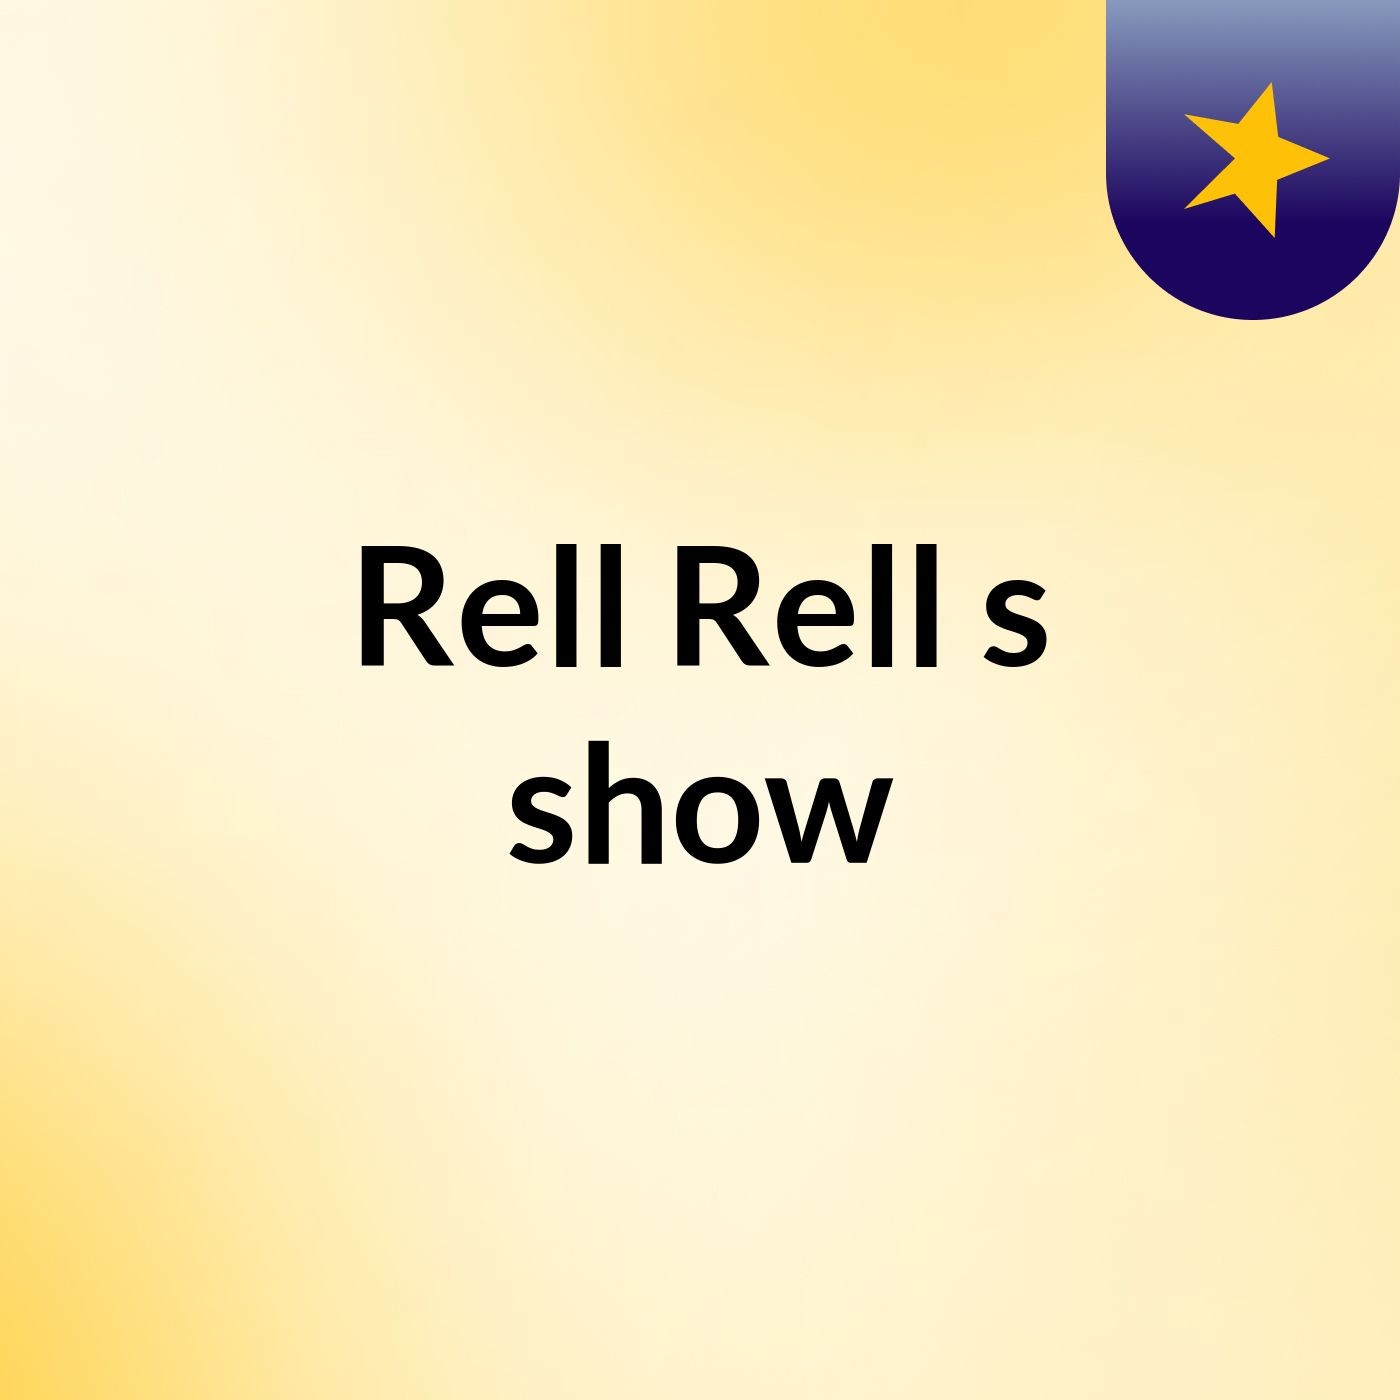 Rell Rell's show